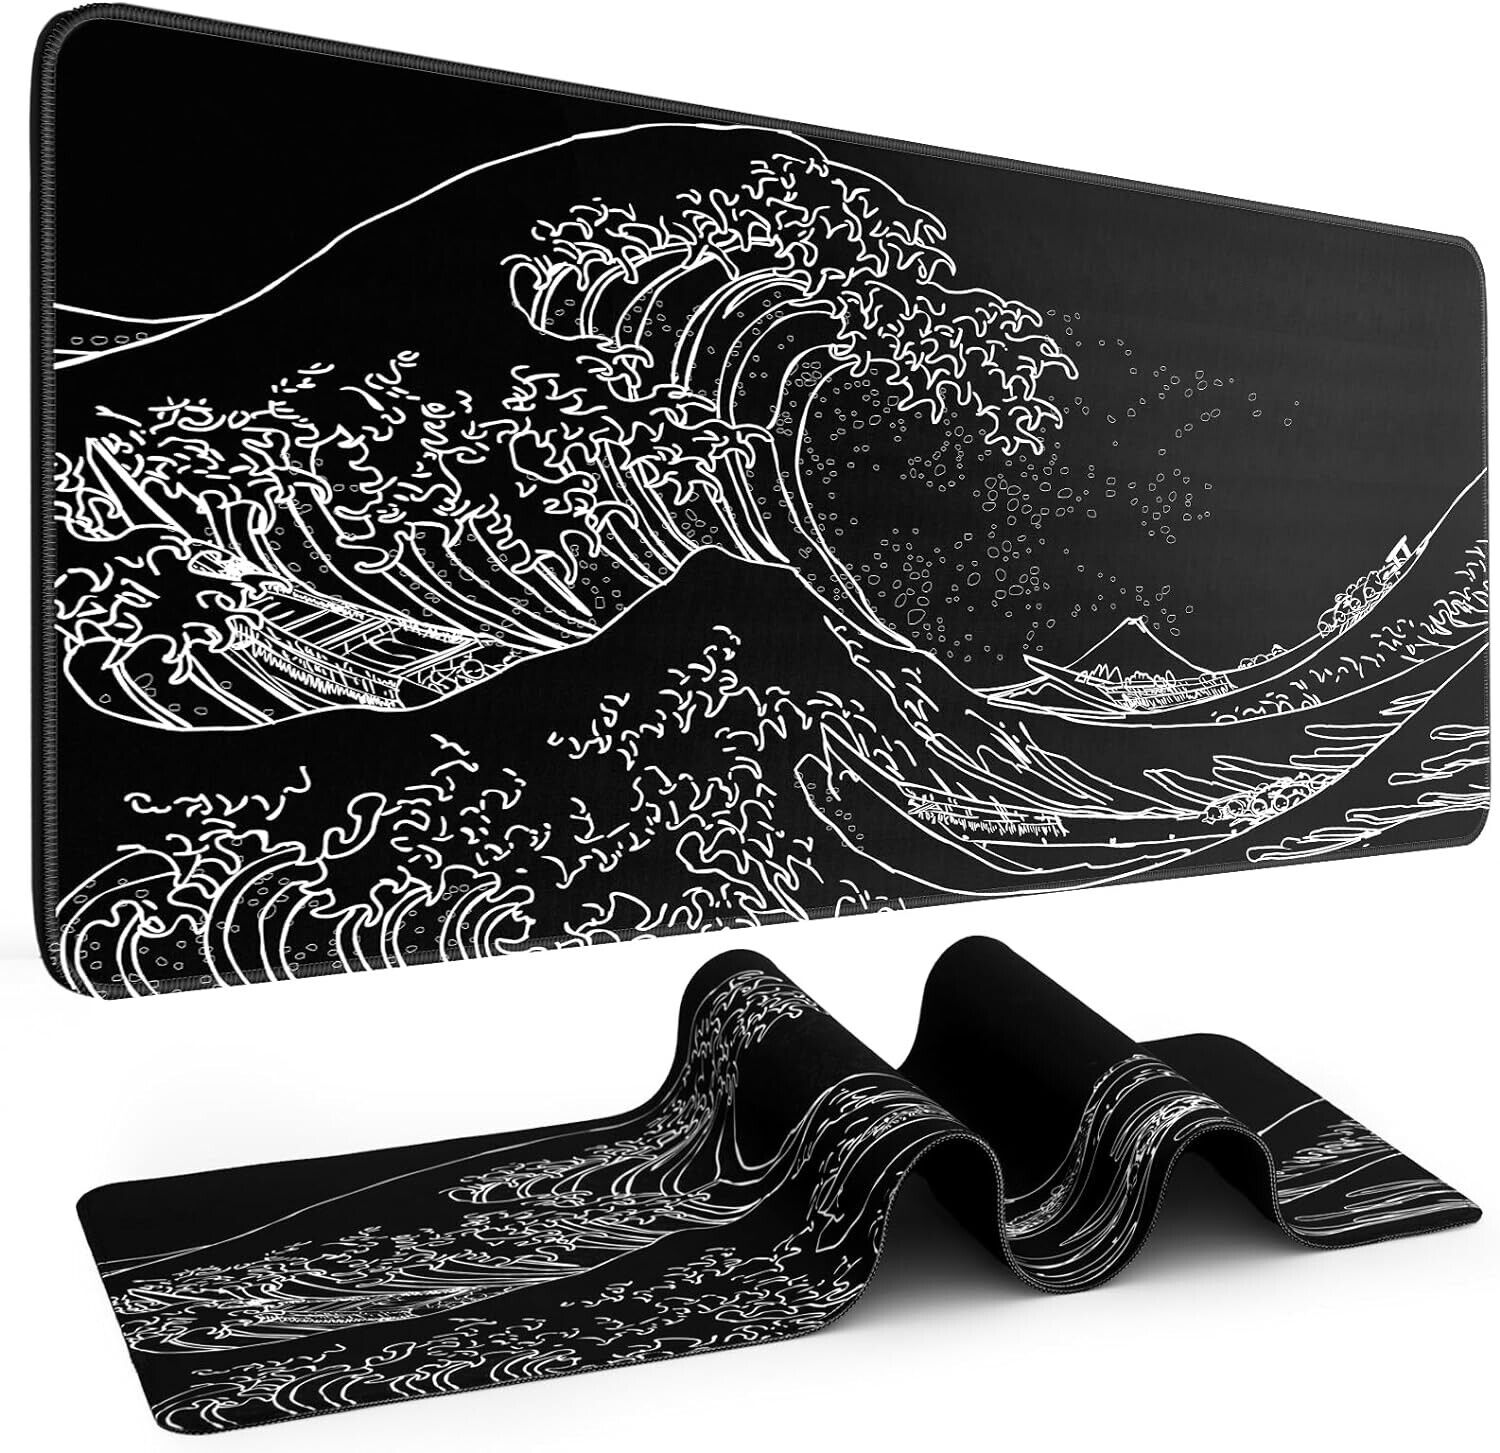 DIGSOM Black Mouse Pad Gaming Japanese Sea Wave Extended X-Large, Pattern 9 